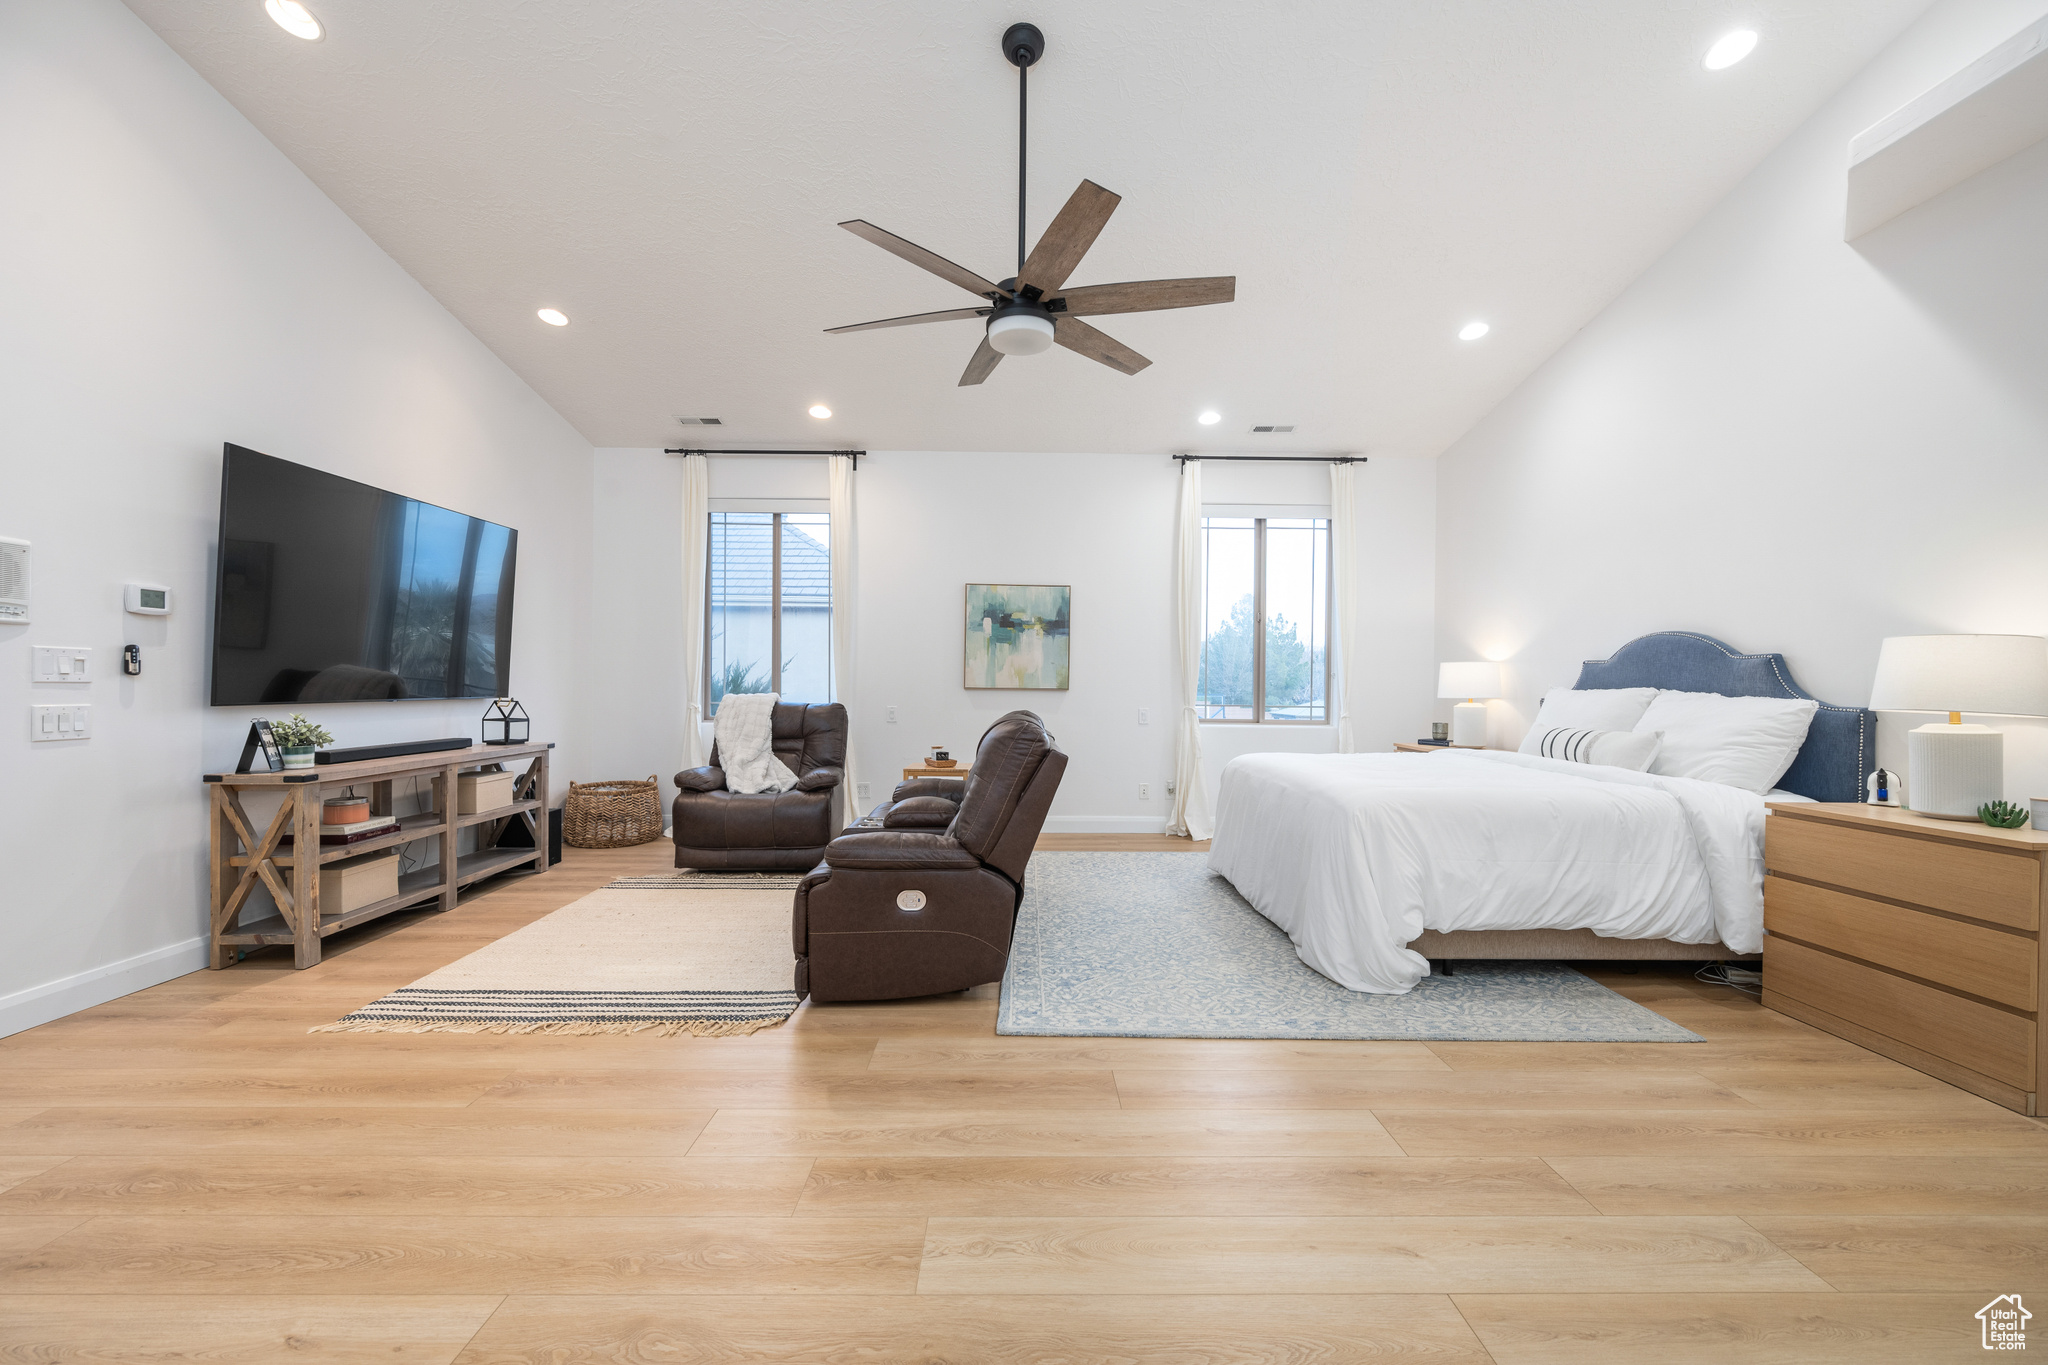 Bedroom with ceiling fan, light wood-type flooring, and lofted ceiling